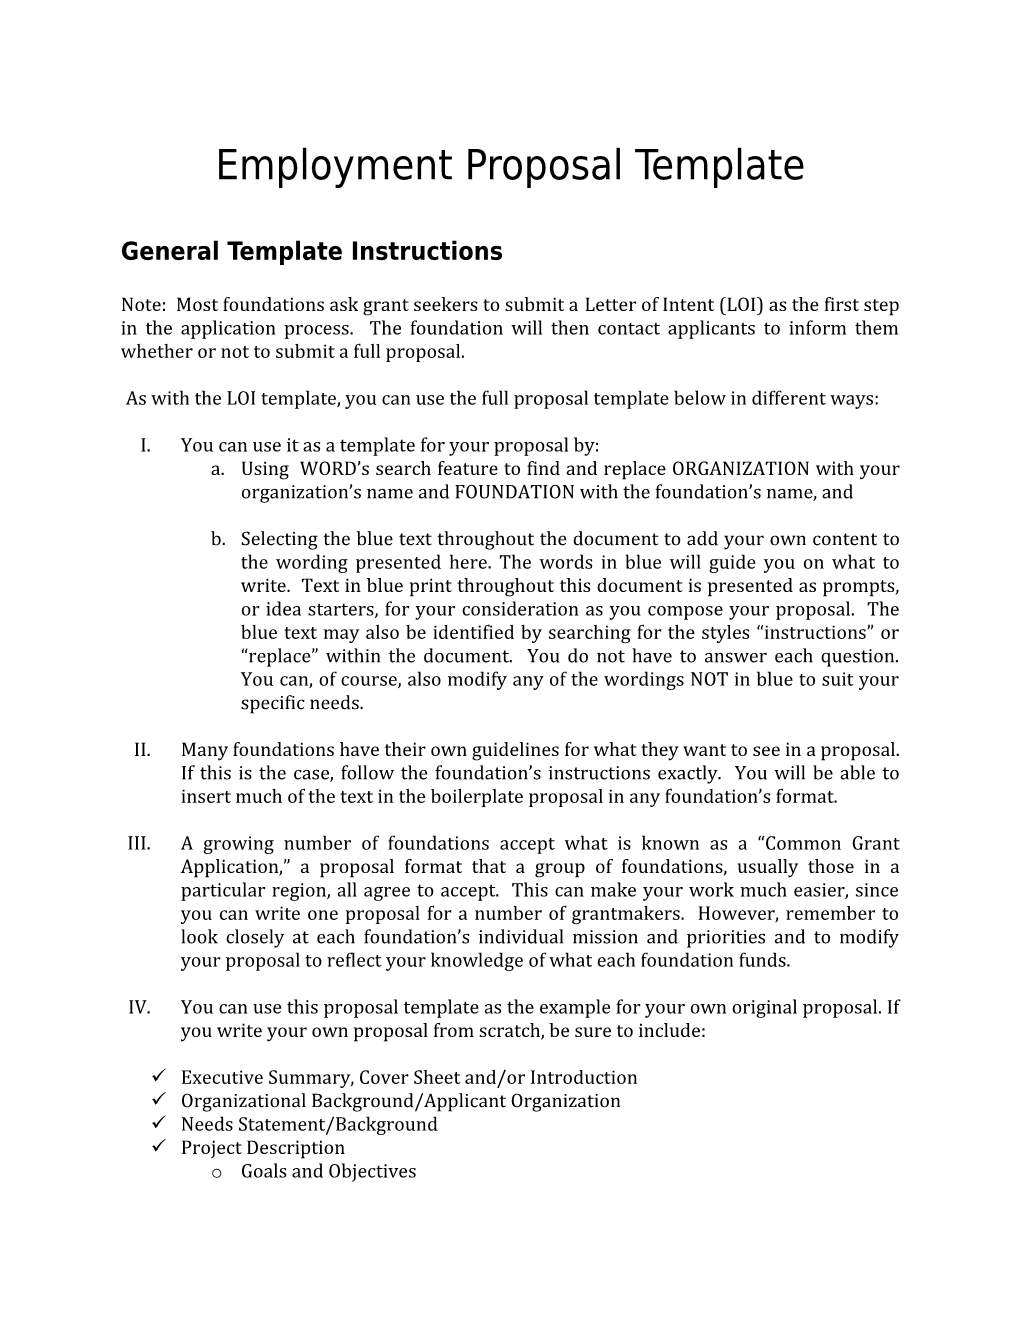 Proposal Template for Ens